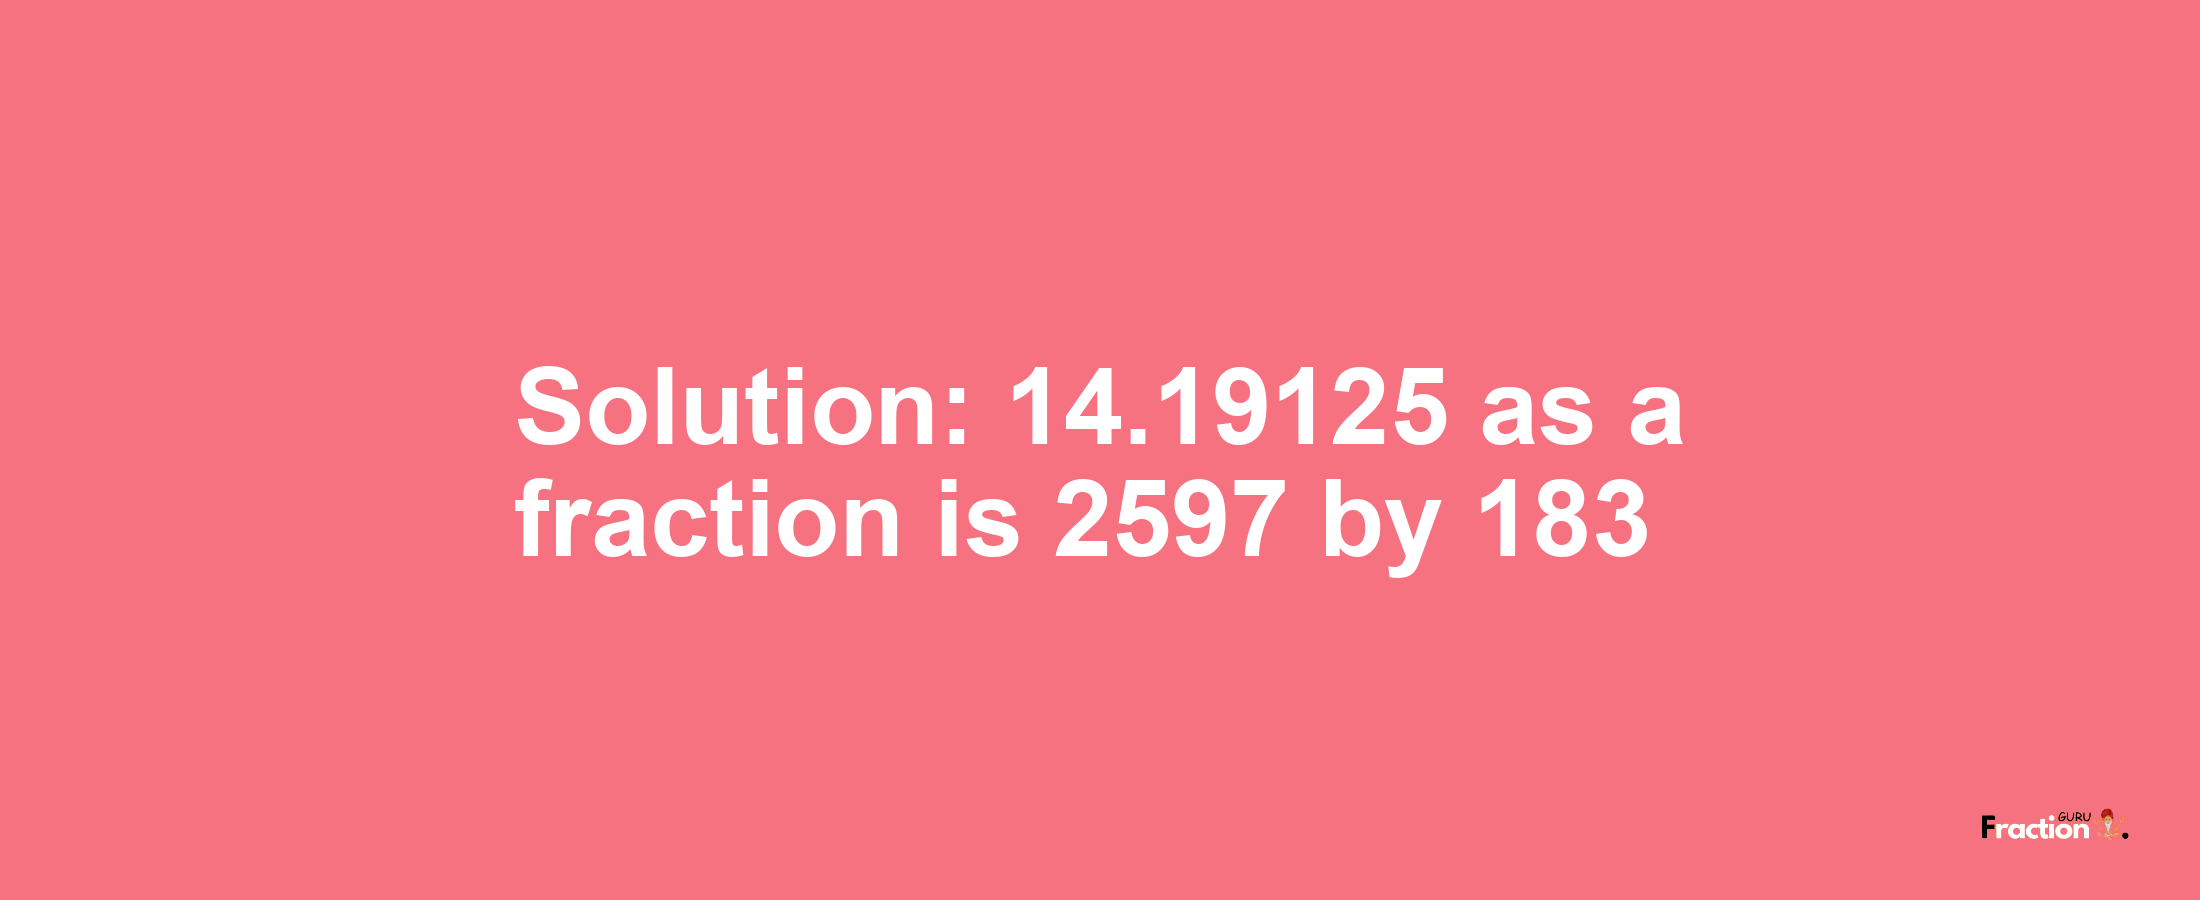 Solution:14.19125 as a fraction is 2597/183